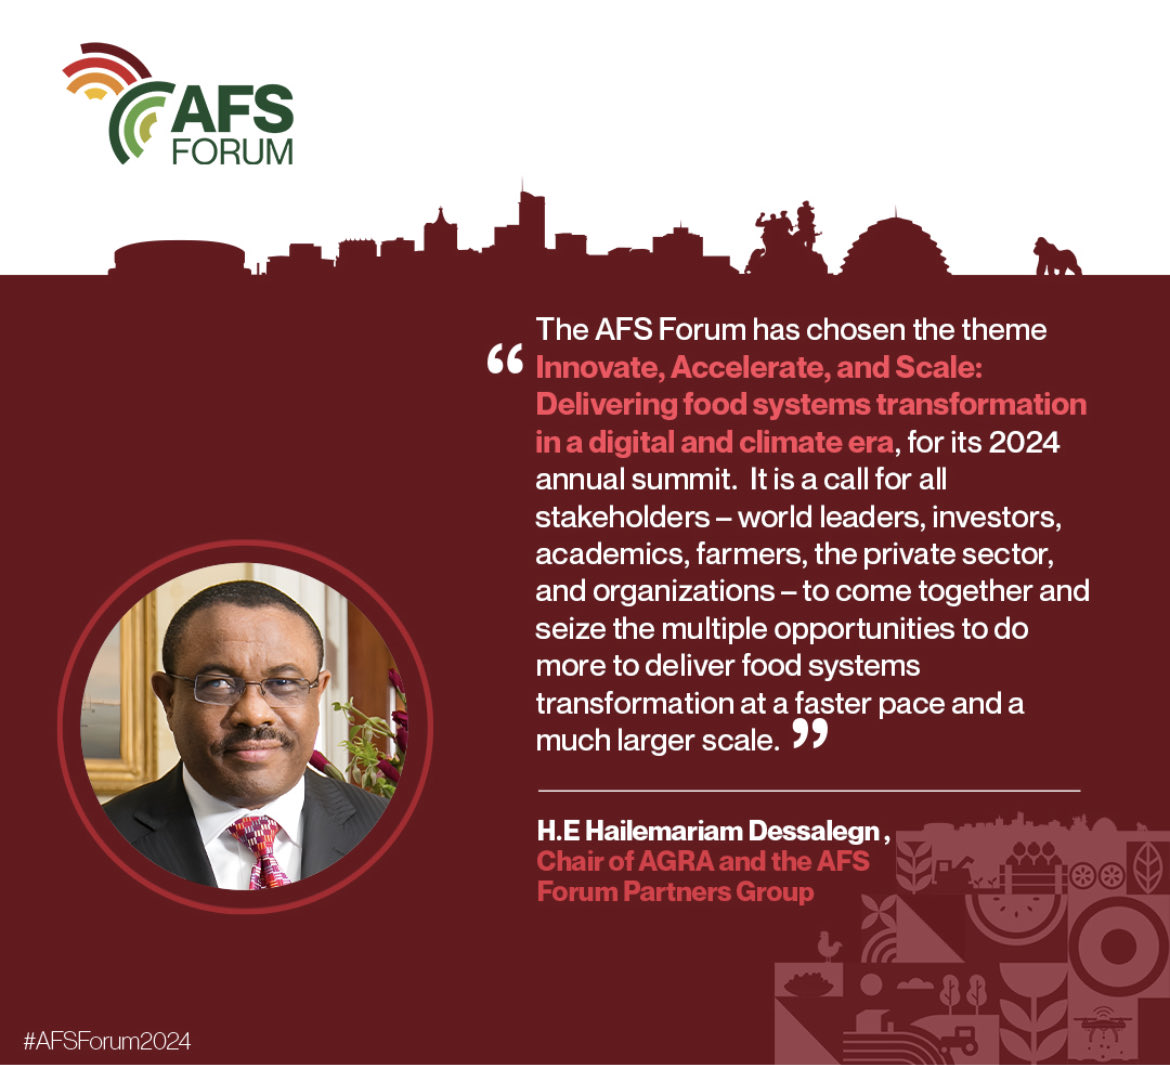 Excited to join ⁦today’s #AFSForum2024 launch in Kigali! All partners working to improve ⁦#FoodSystems &⁩ #climateaction in Africa, make sure to join & #VisitRwanda Sept 3-6! ⁦@RDBrwanda⁩ ⁦@RwandaAgri⁩ ⁦⁦⁦⁦@AGRA_Africa⁩ ⁦⁦@USAIDAfrica⁩